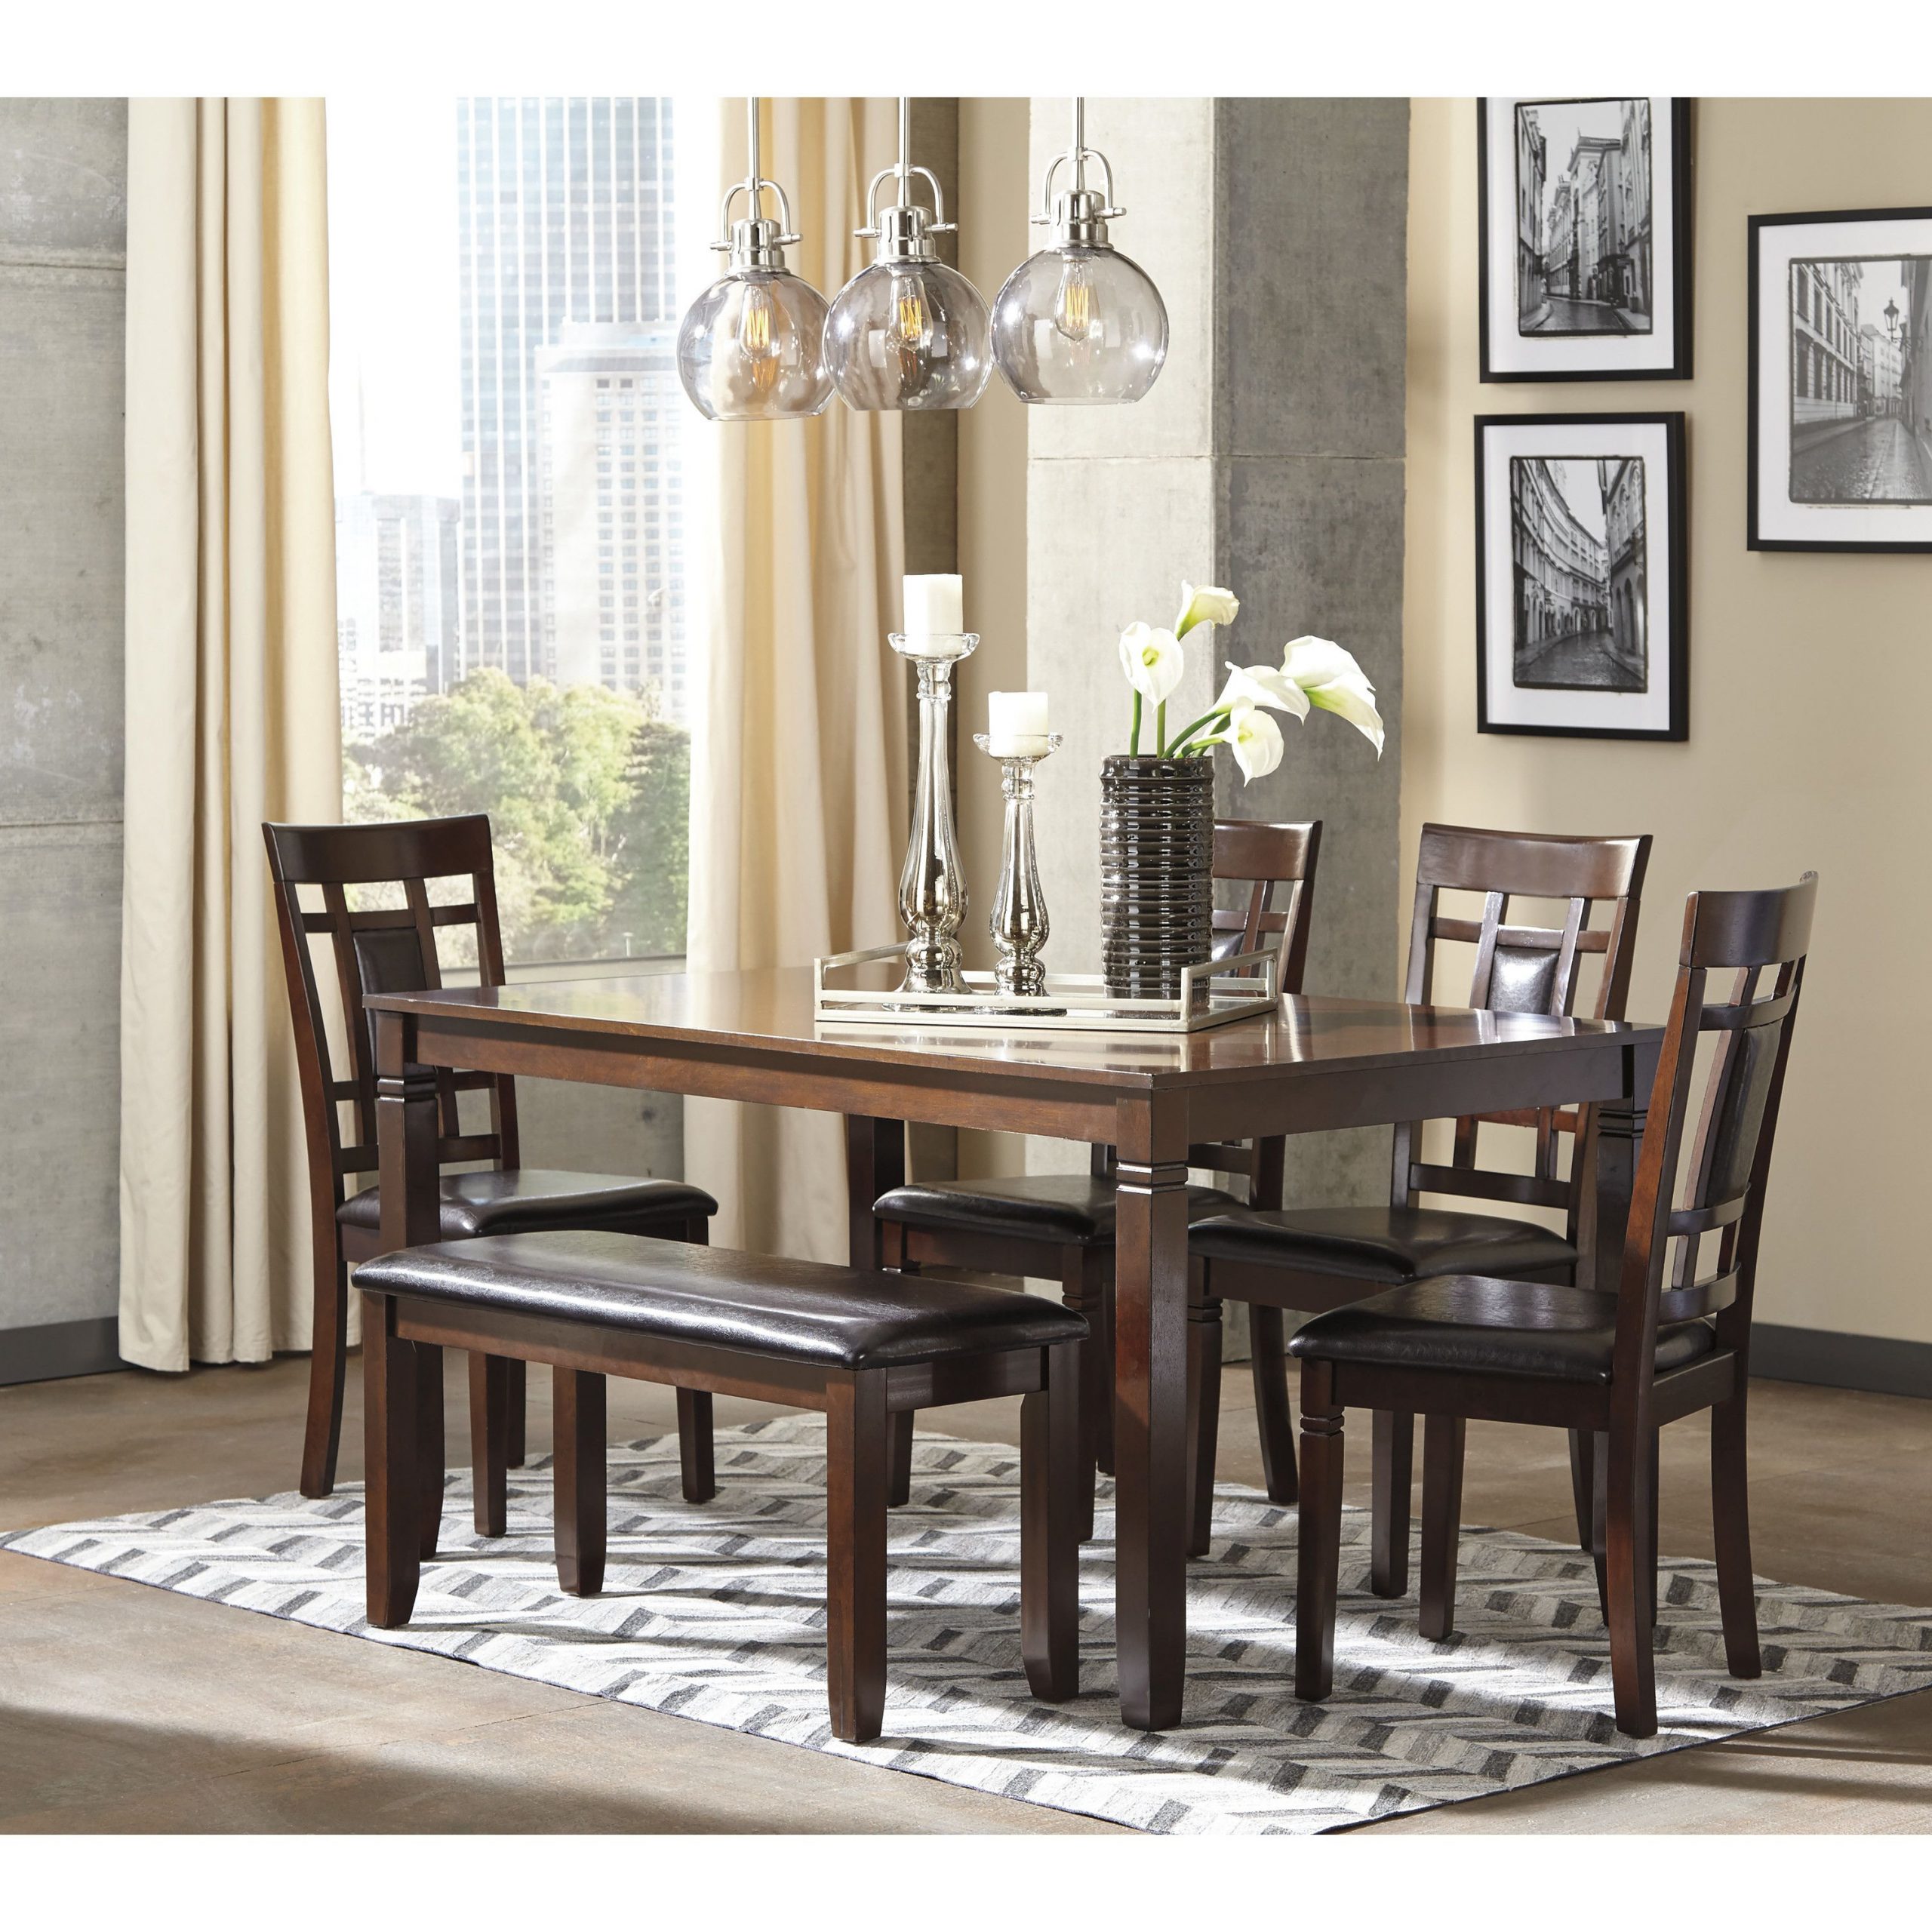 Dining Room Set Jcpenney • Faucet Ideas Site